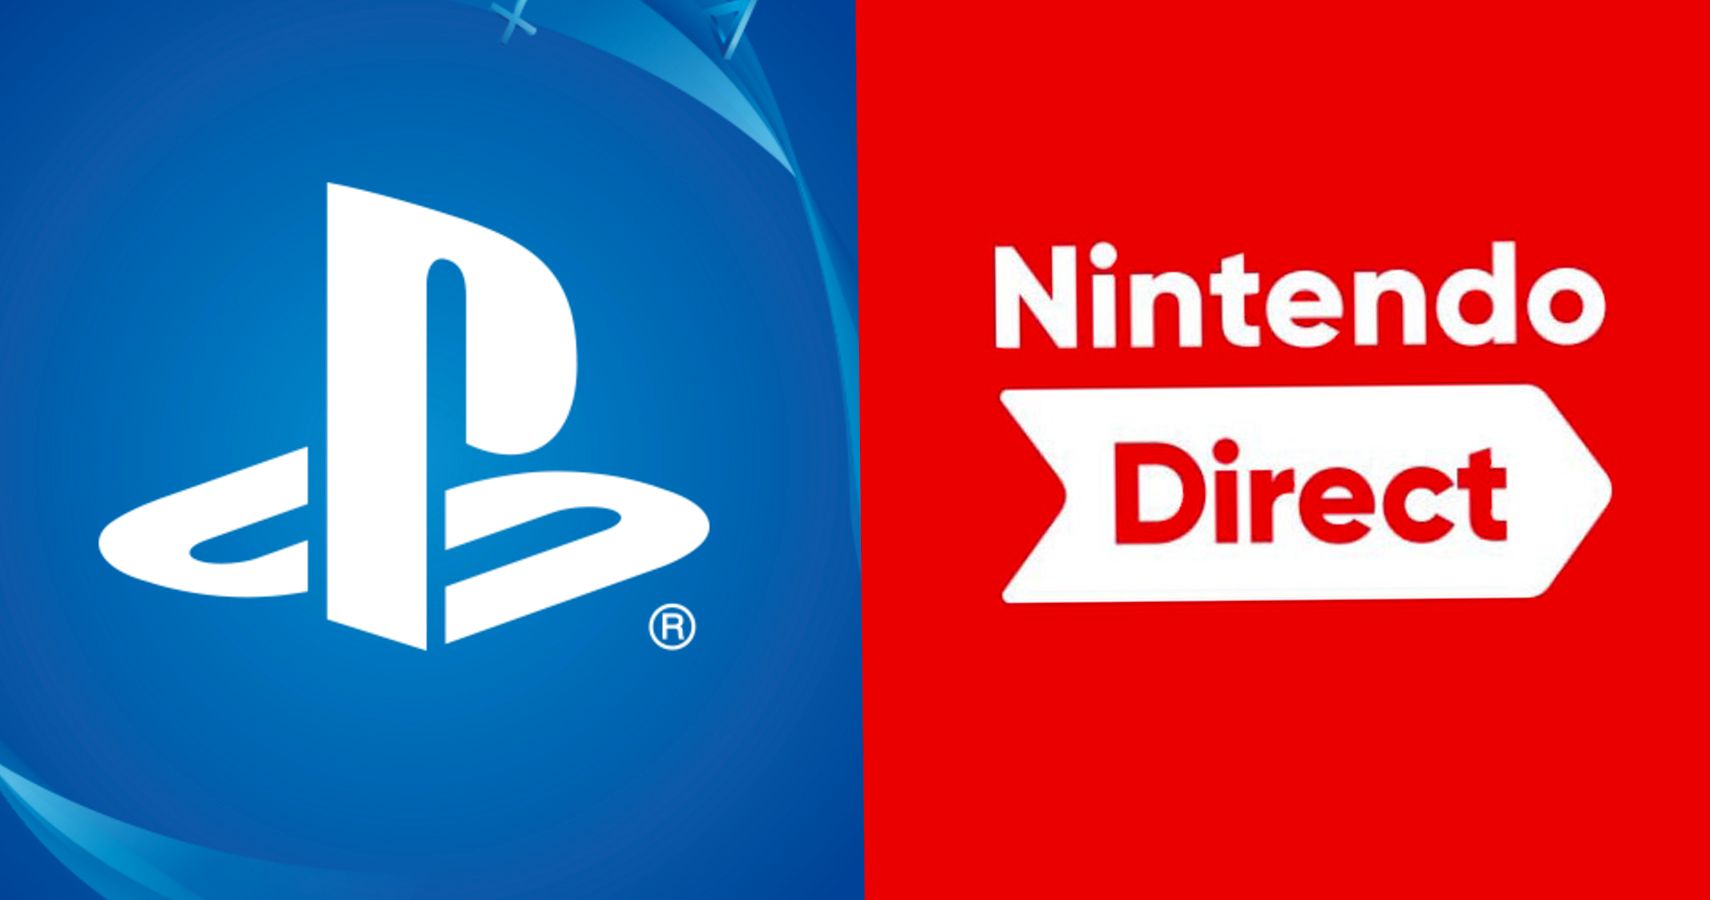 Sony's First State Of Play Presentation Led To 'Nintendo Direct' Trending  On Social Media